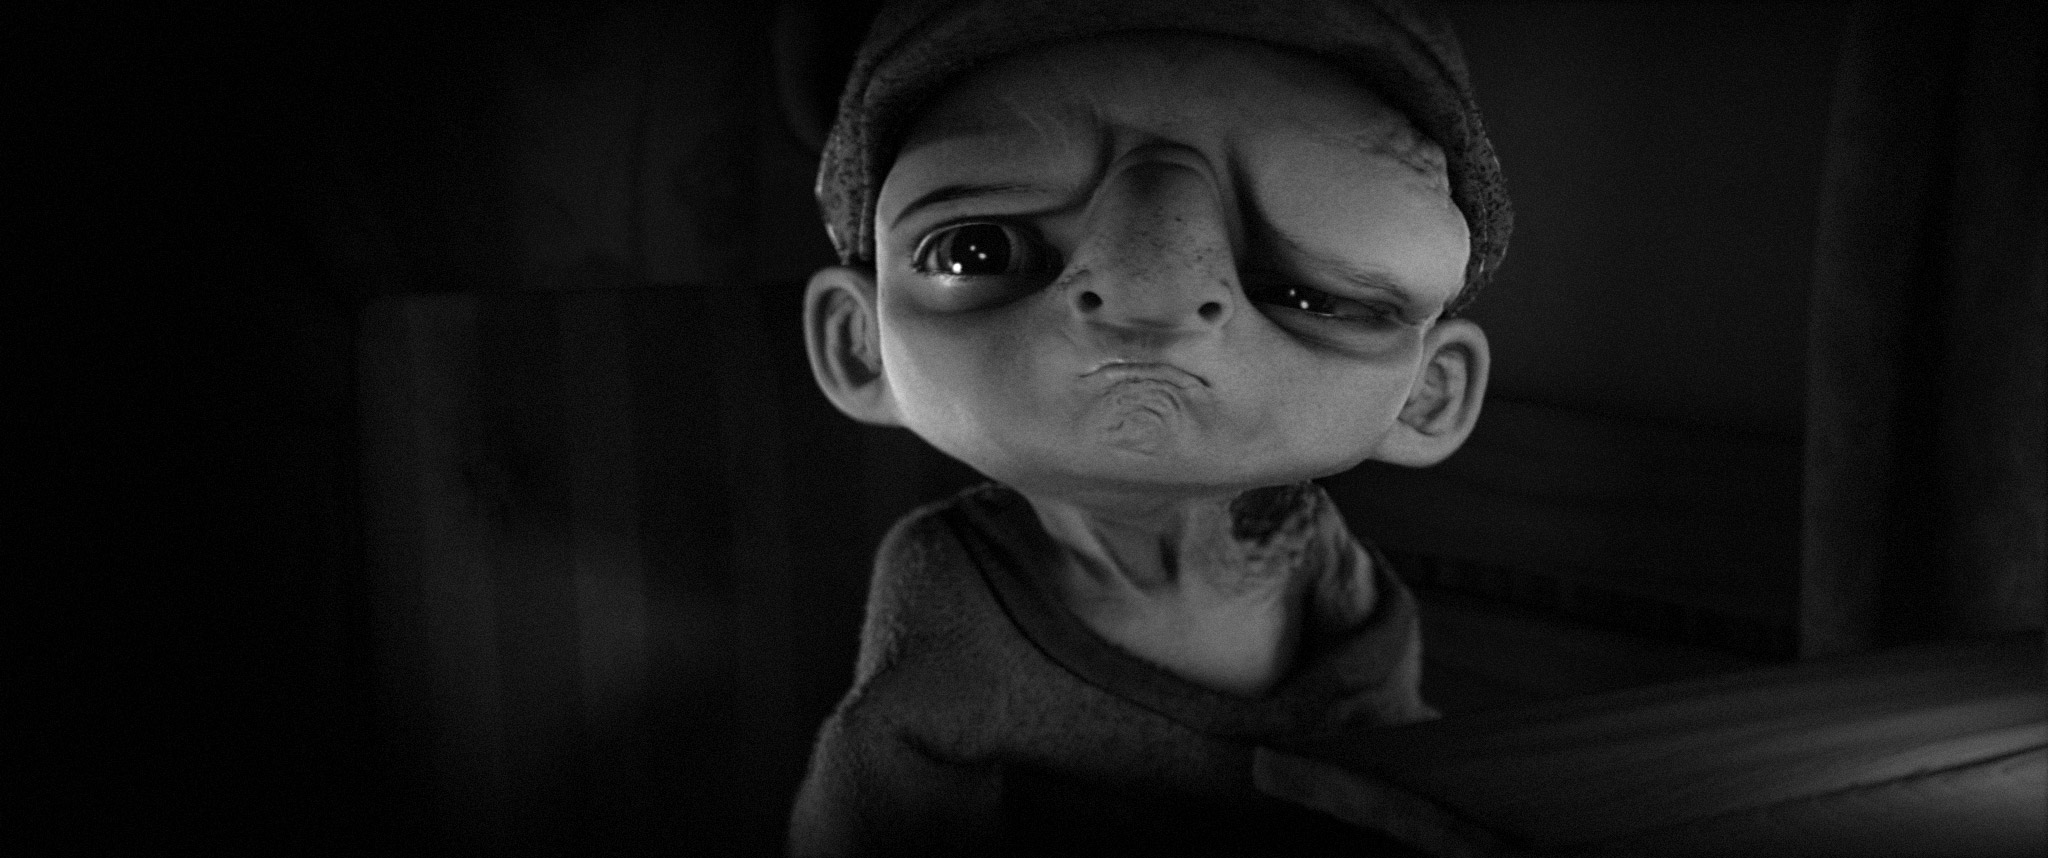 incredible-and-touching-animated-short-little-freak-8.jpg